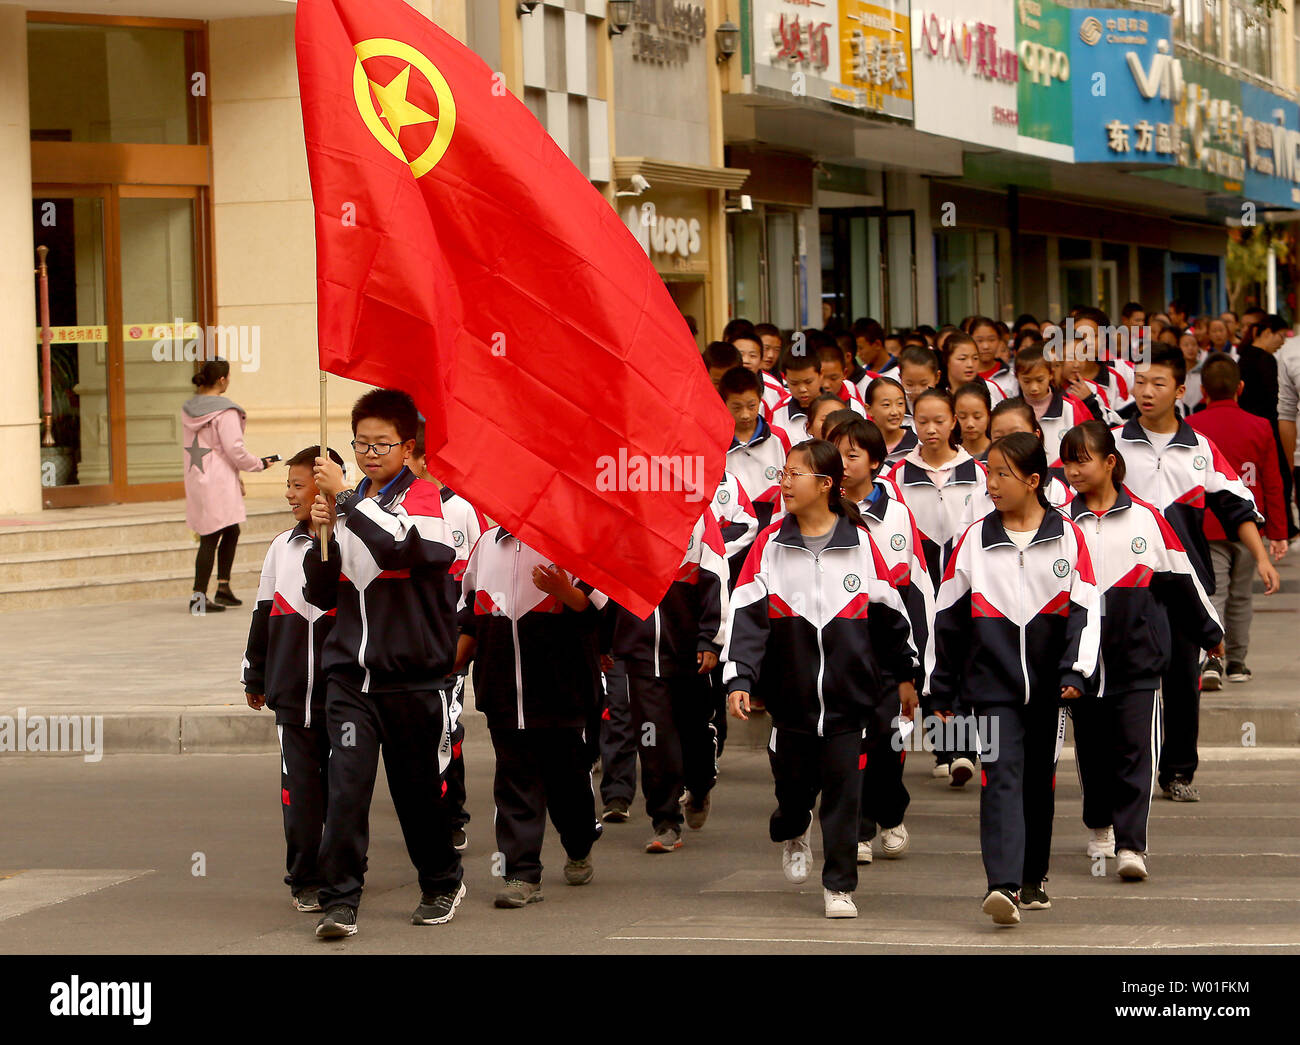 Young Patriots, linked closely with the Communist Party, march down a sidewalk in Dunhuang, Gansu Province, on September 30, 2018.  Public schools in China are highly influenced by Communist dogma and history, with students being taught and encouraged to embrace the principles of socialism.      Photo by Stephen Shaver/UPI Stock Photo